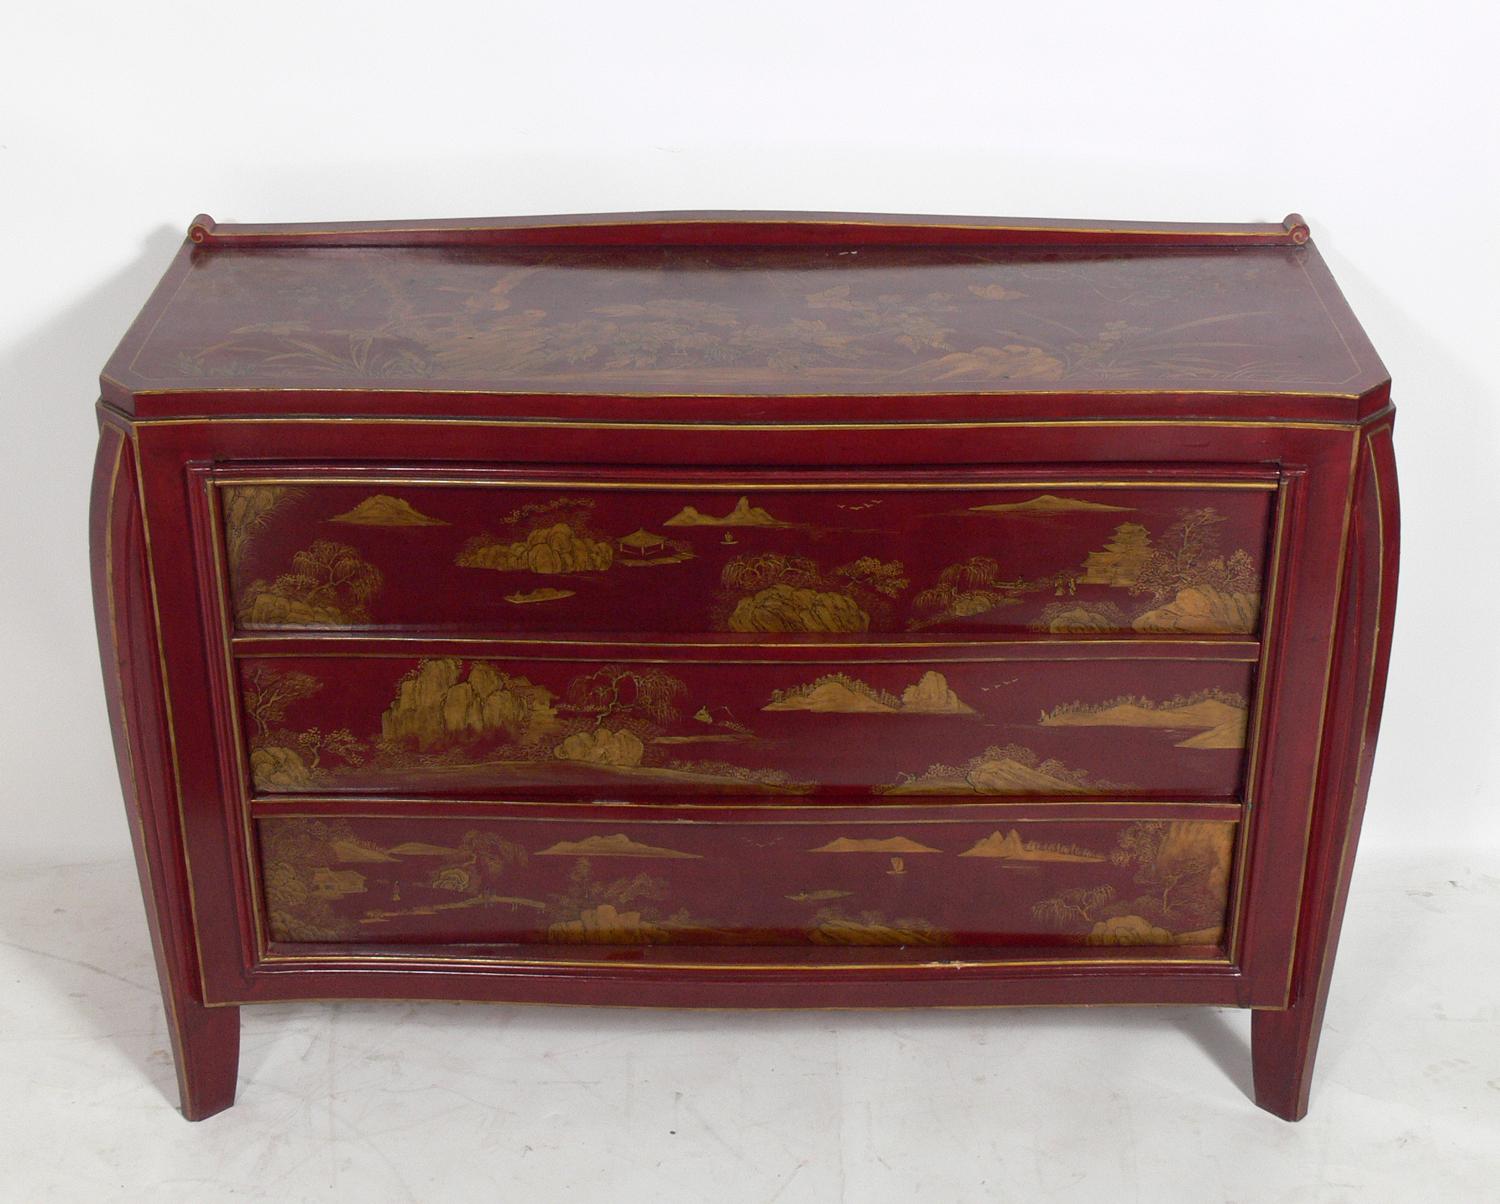 Cinnabar and gold hand painted chinoiserie chest, probably Chinese, circa 1950s or earlier. It is a versatile size and can be used as a chest or dresser in a bedroom, or as a credenza, media cabinet, or bar in a living area.